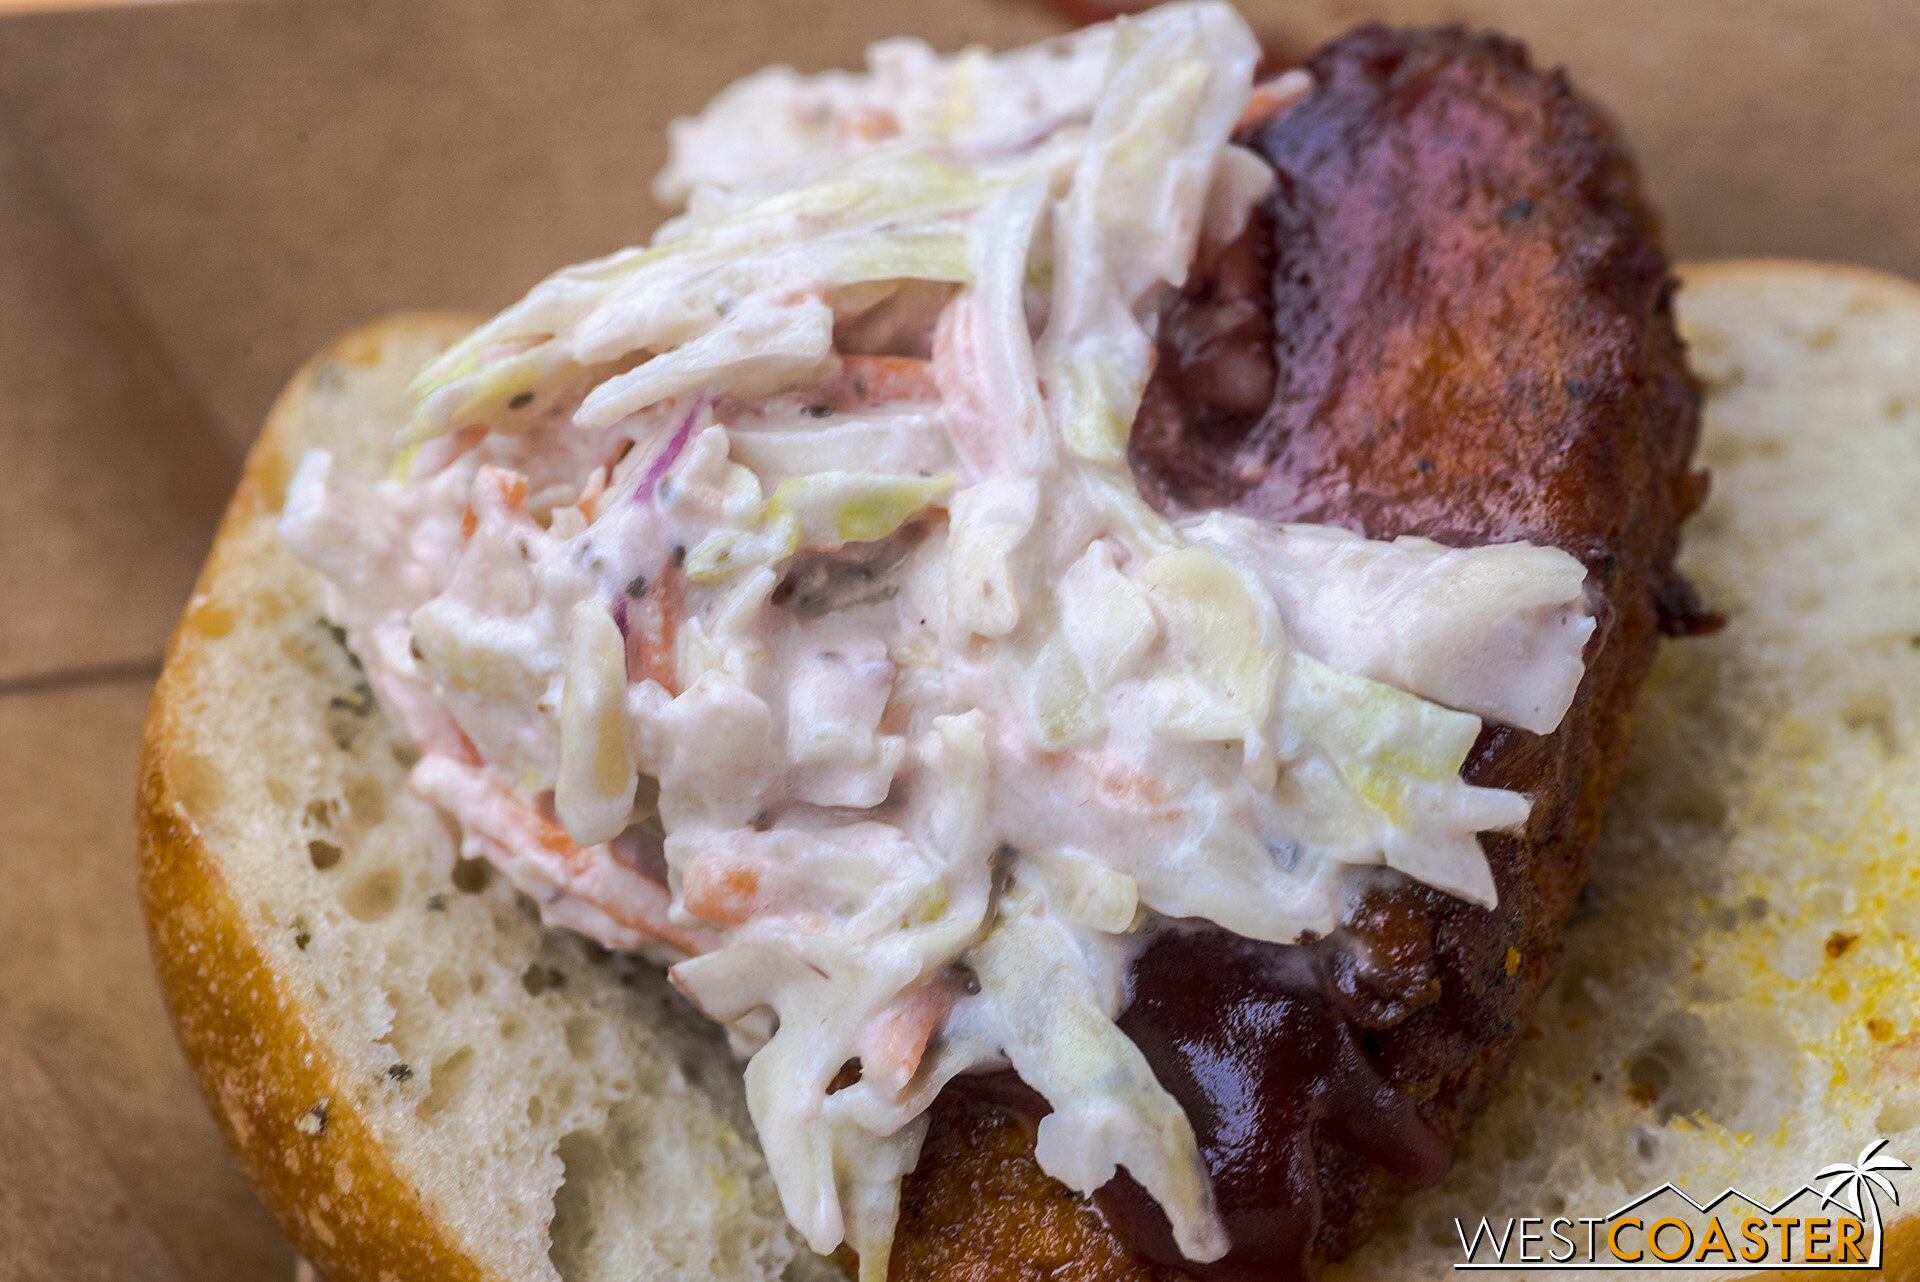  Winter Sliderland Marketplace: Fried Turkey Slider – With cranberry sauce  The turkey had a nice flavor but was a little tough.  The slaw added a good creamy and slightly tangy texture, but this might be an item that is hit or miss based on how long